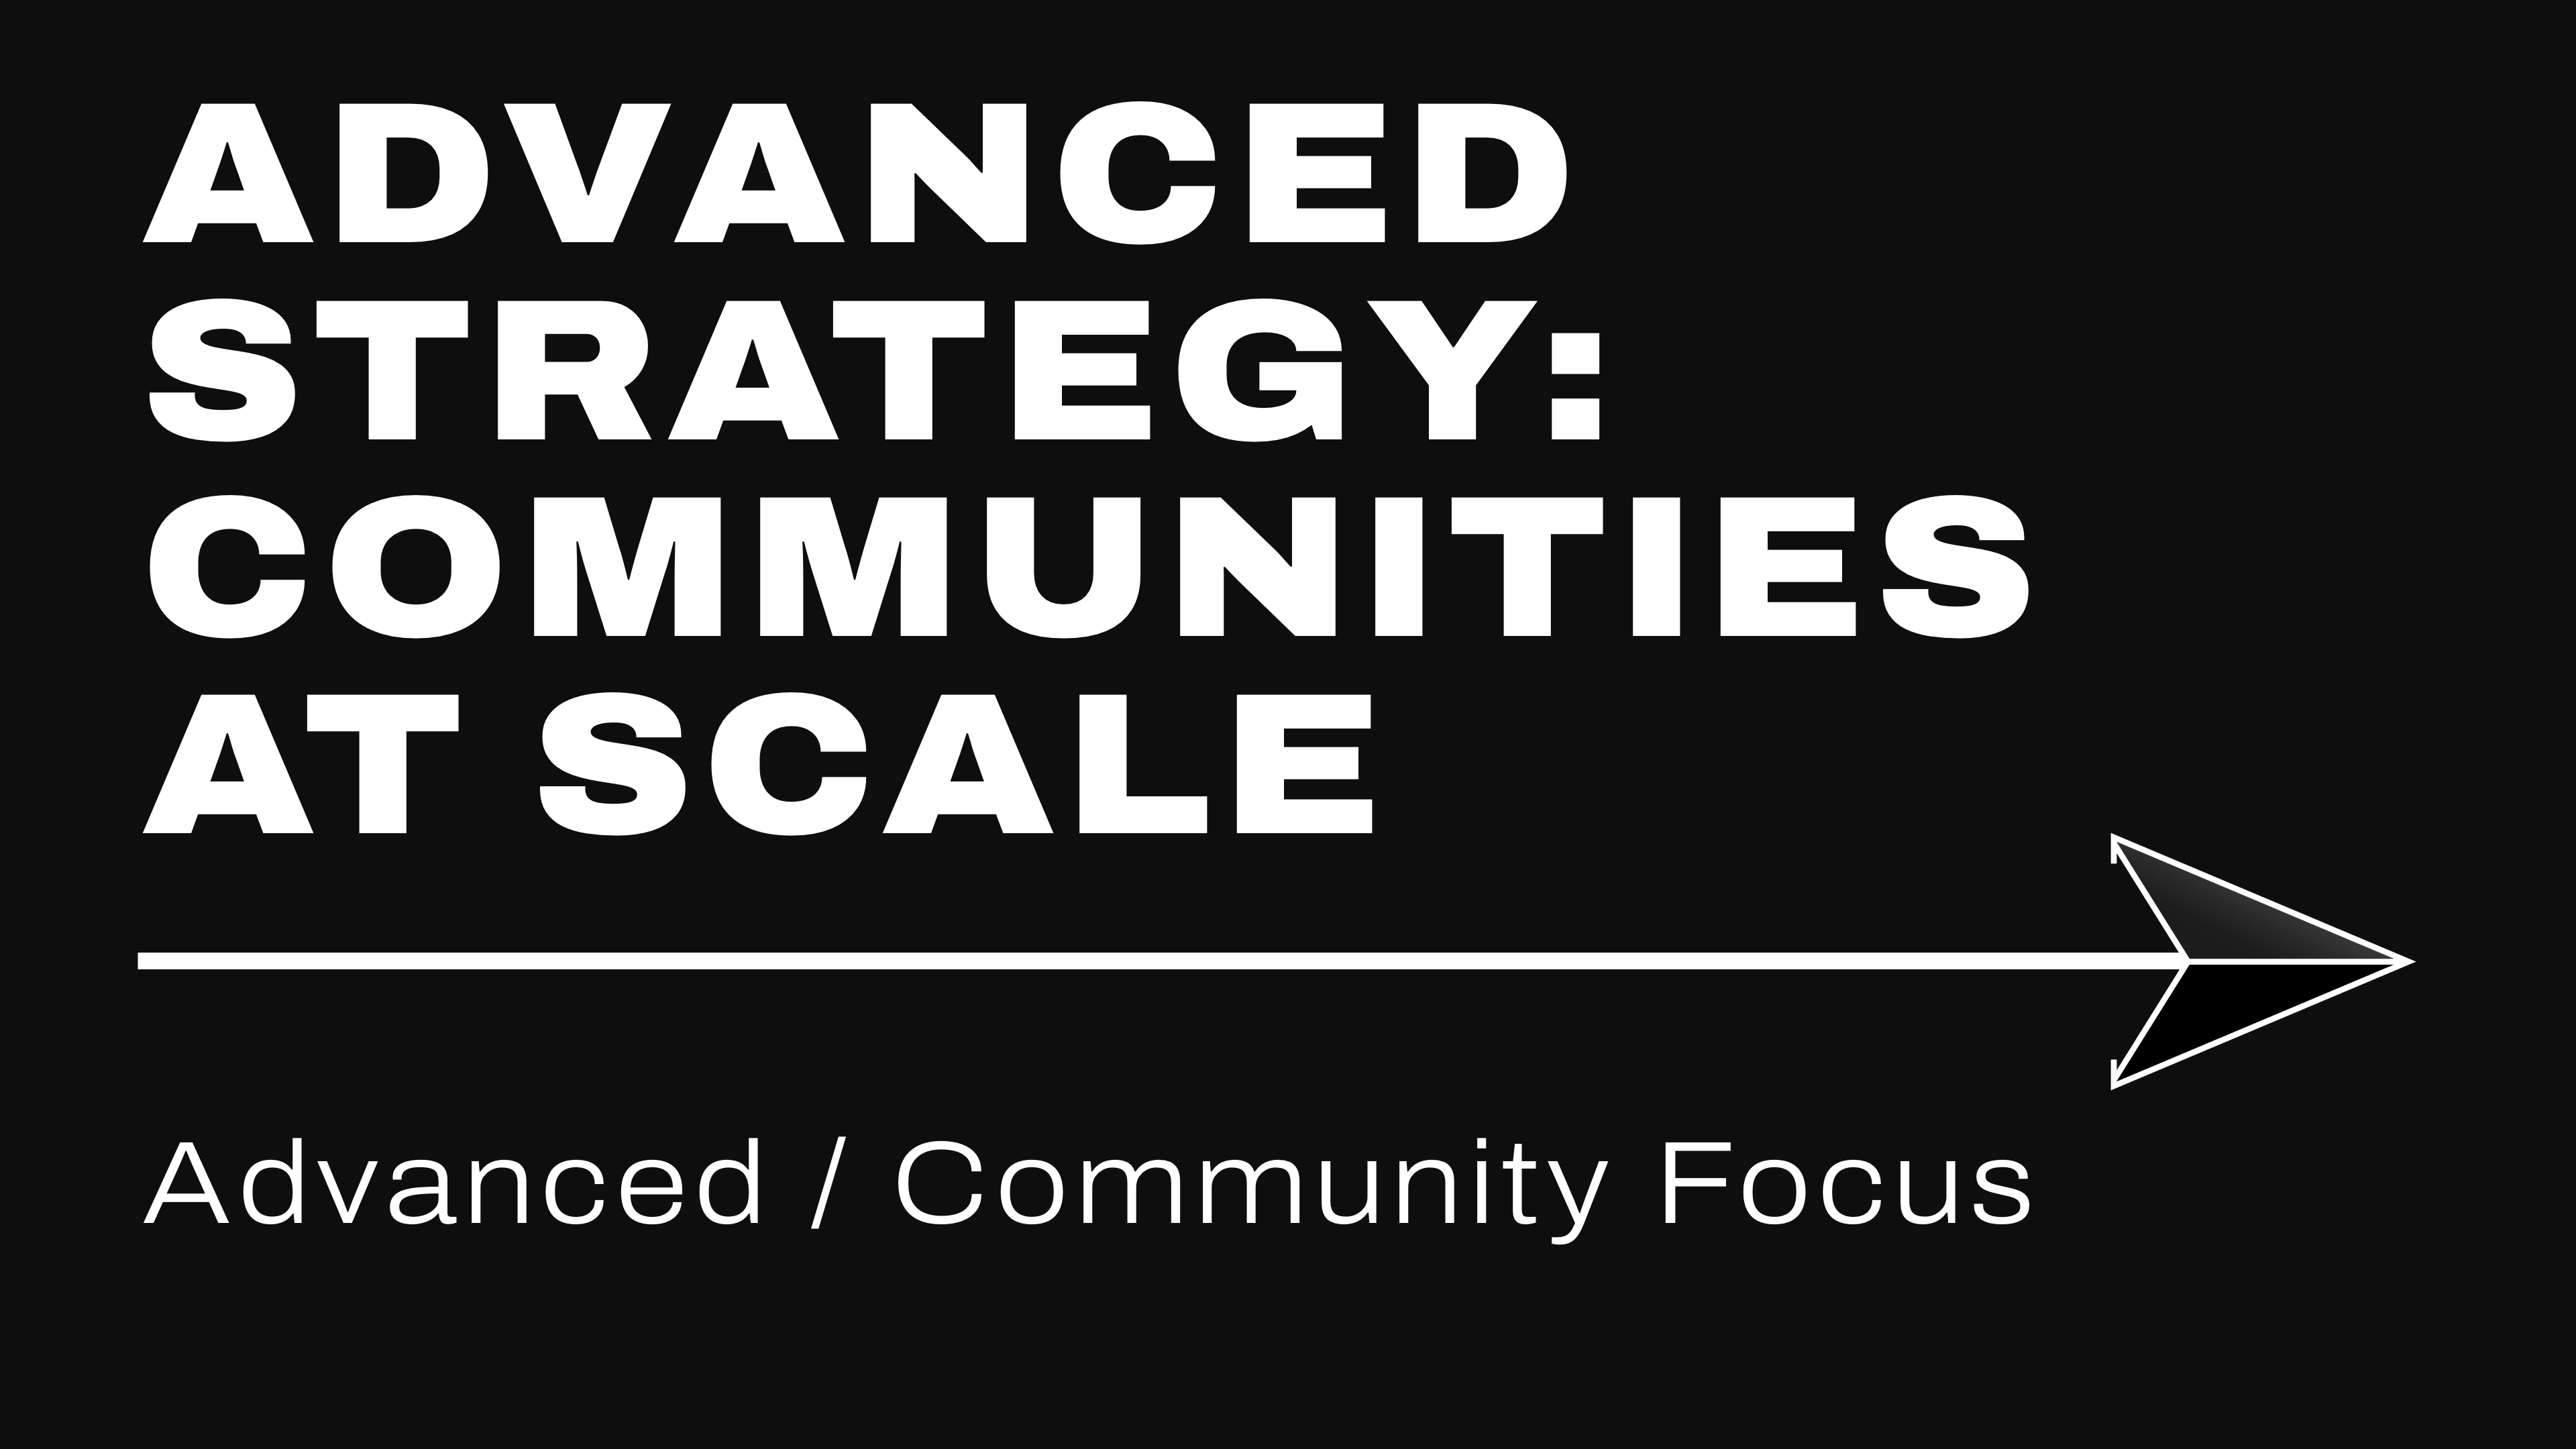 Advanced Strategy: Communities At Scale